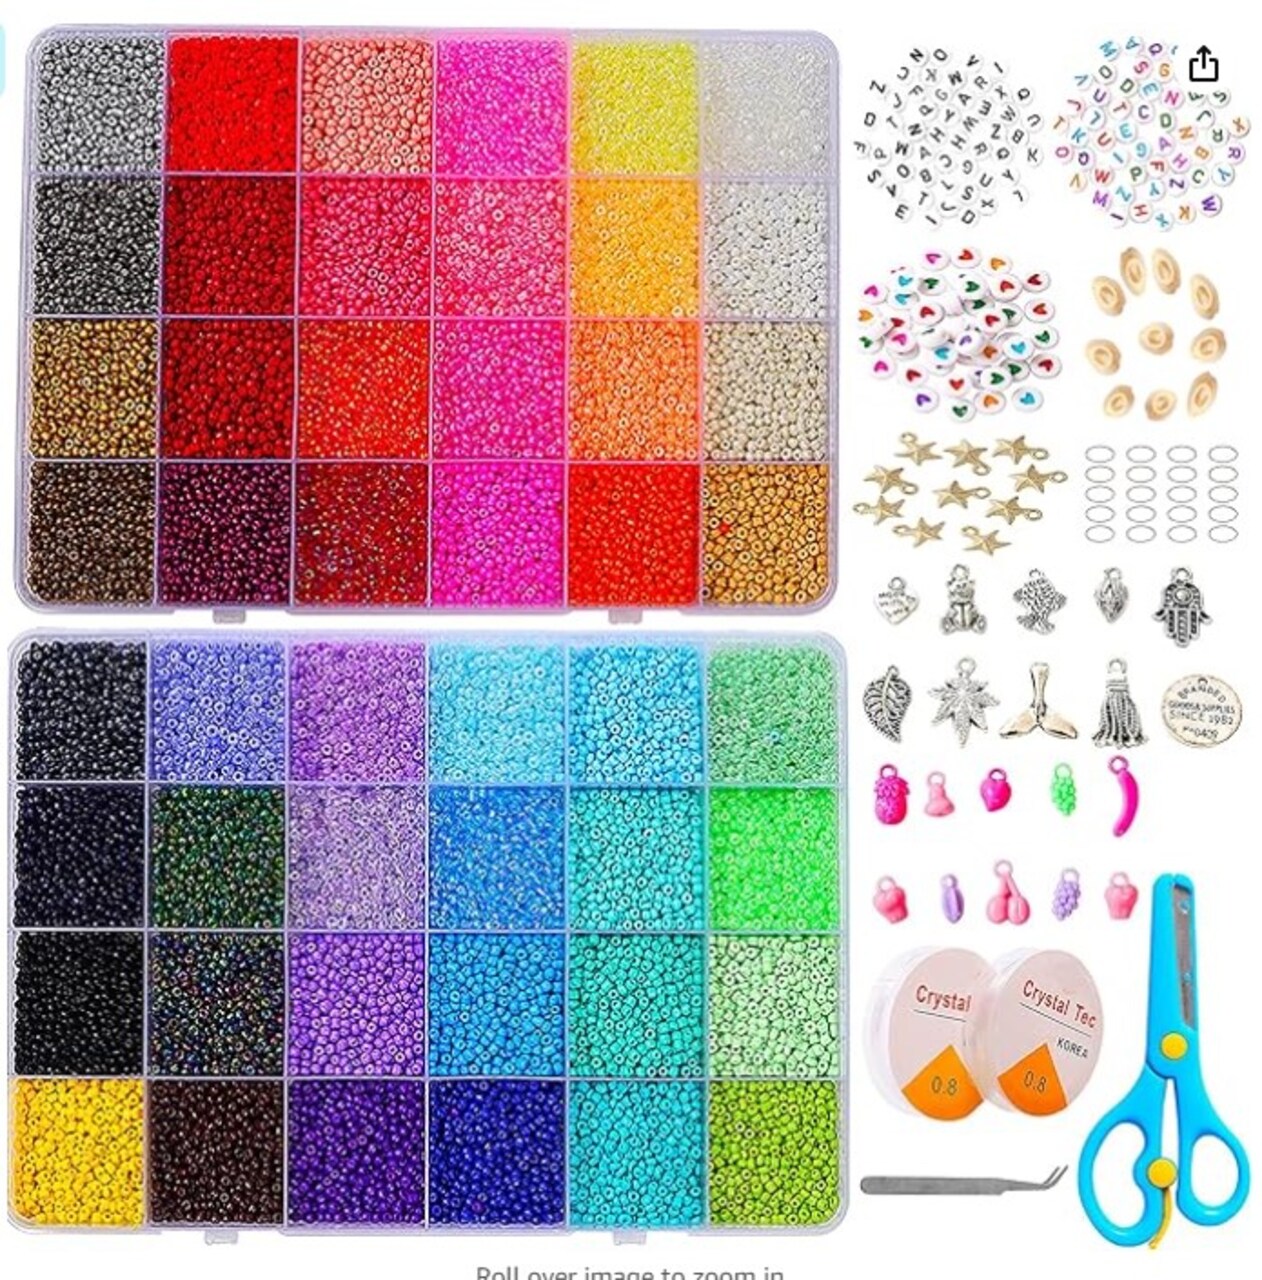 36000+pcs 2mm 48 Colors Glass Seed Beads for Bracelet Jewelry